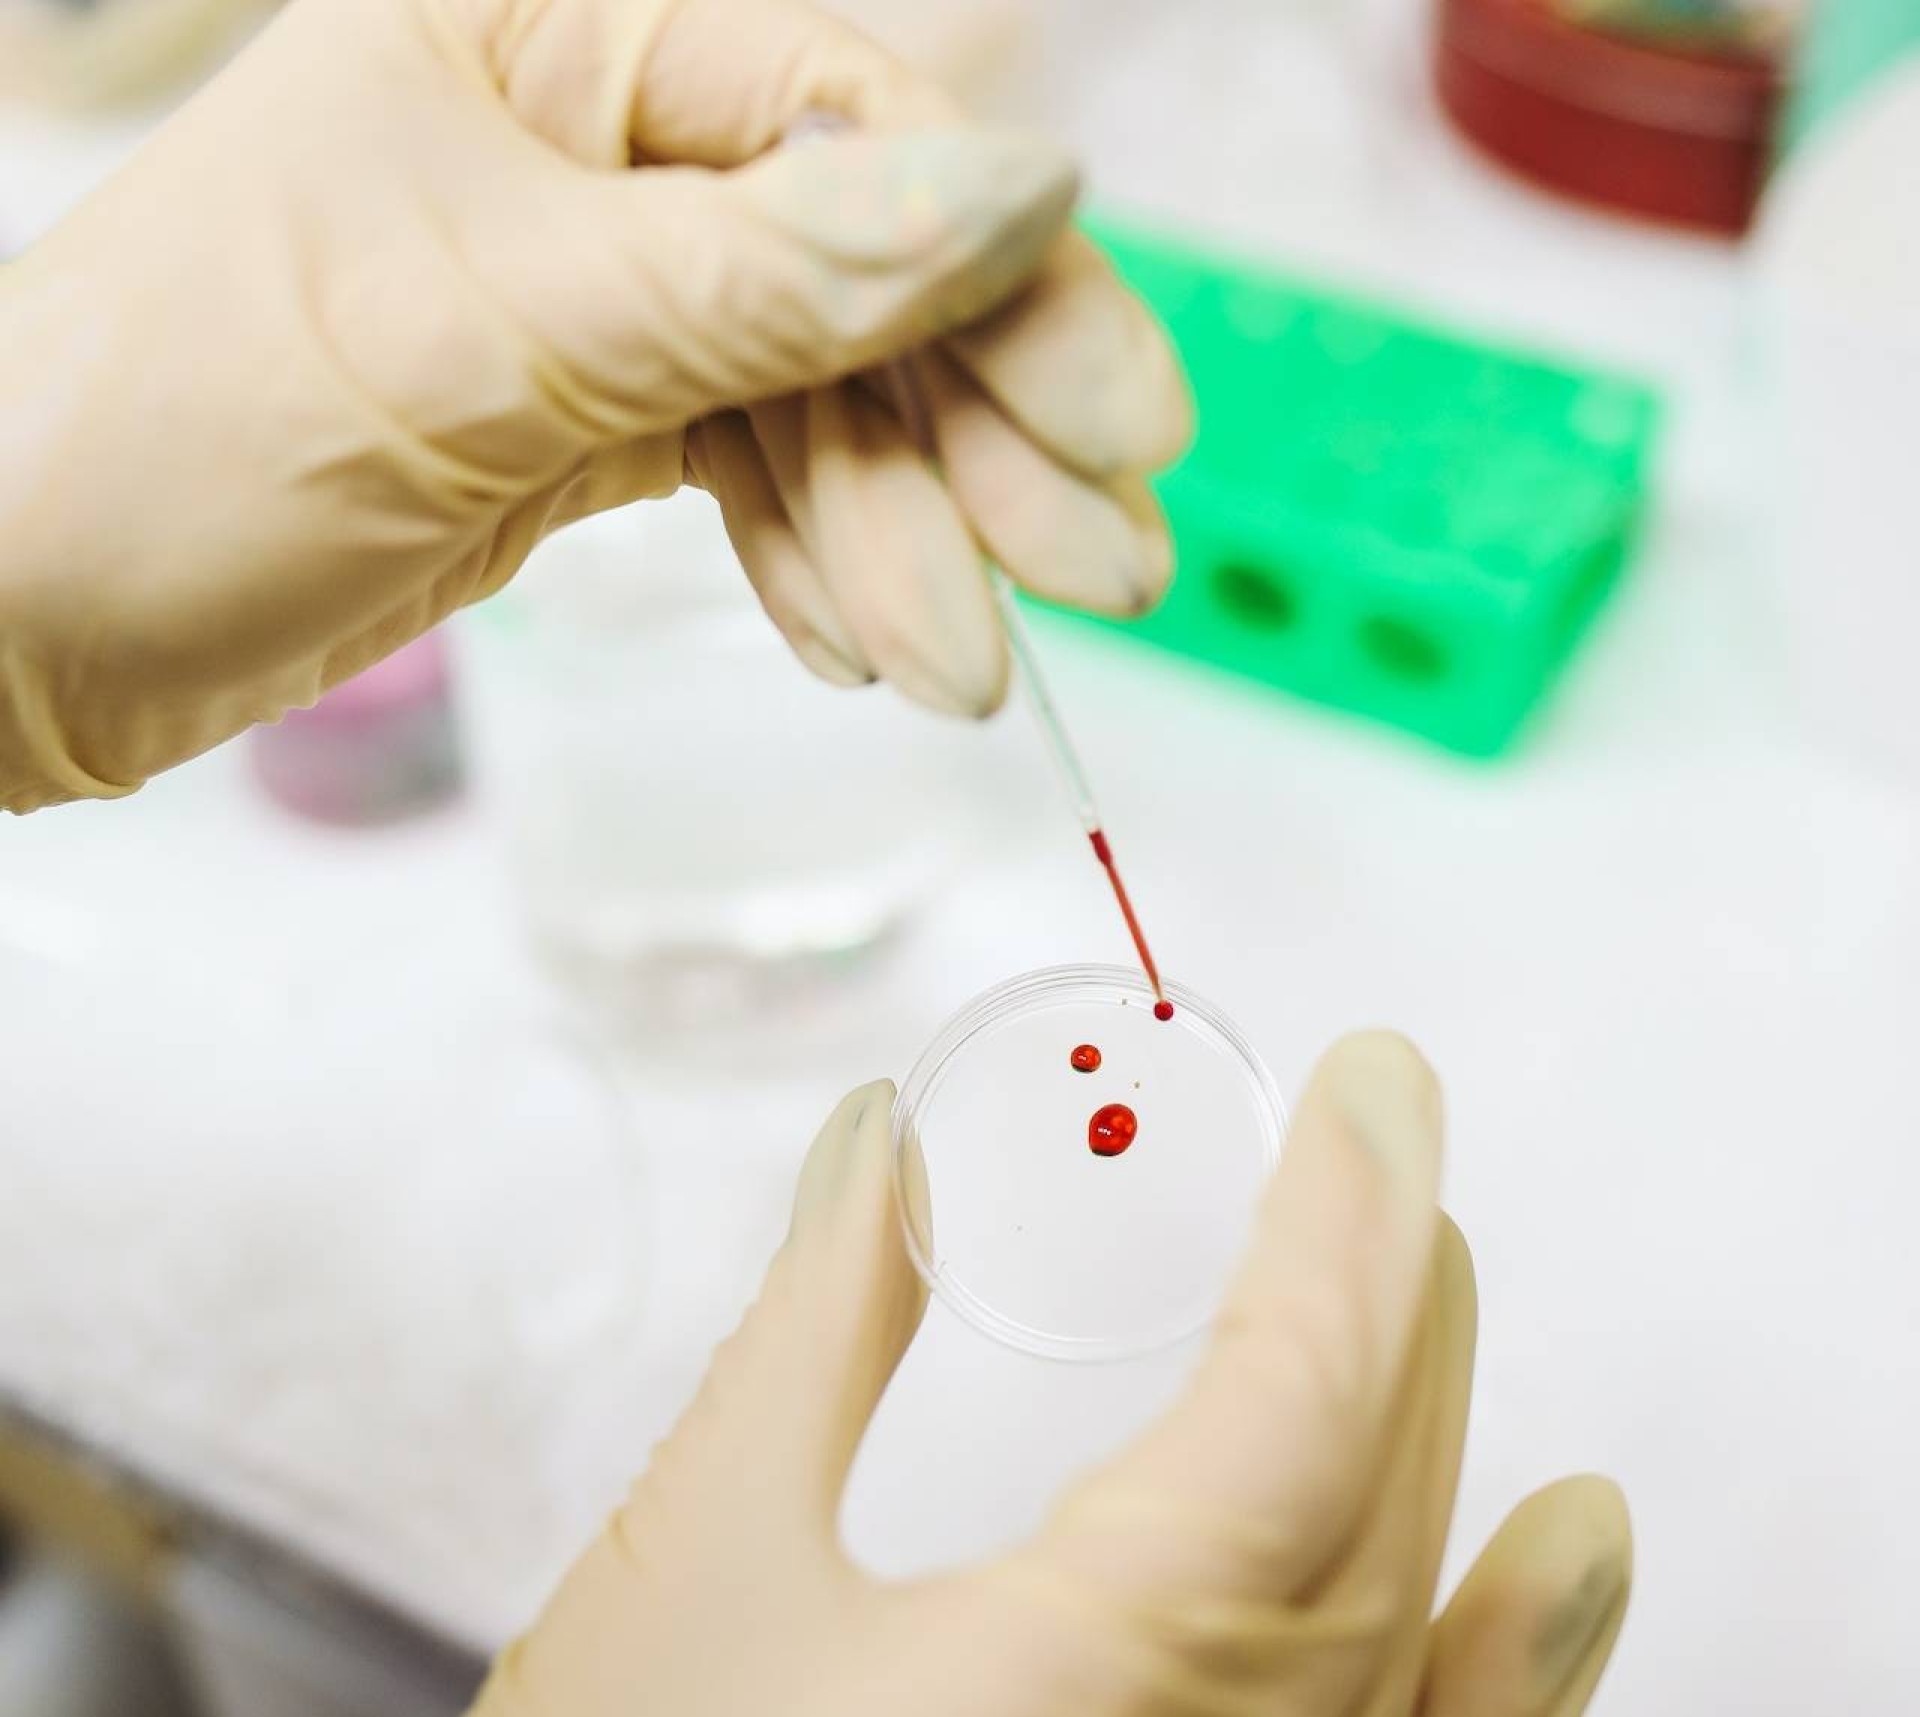 Scientist dropping blood into dish for titer test